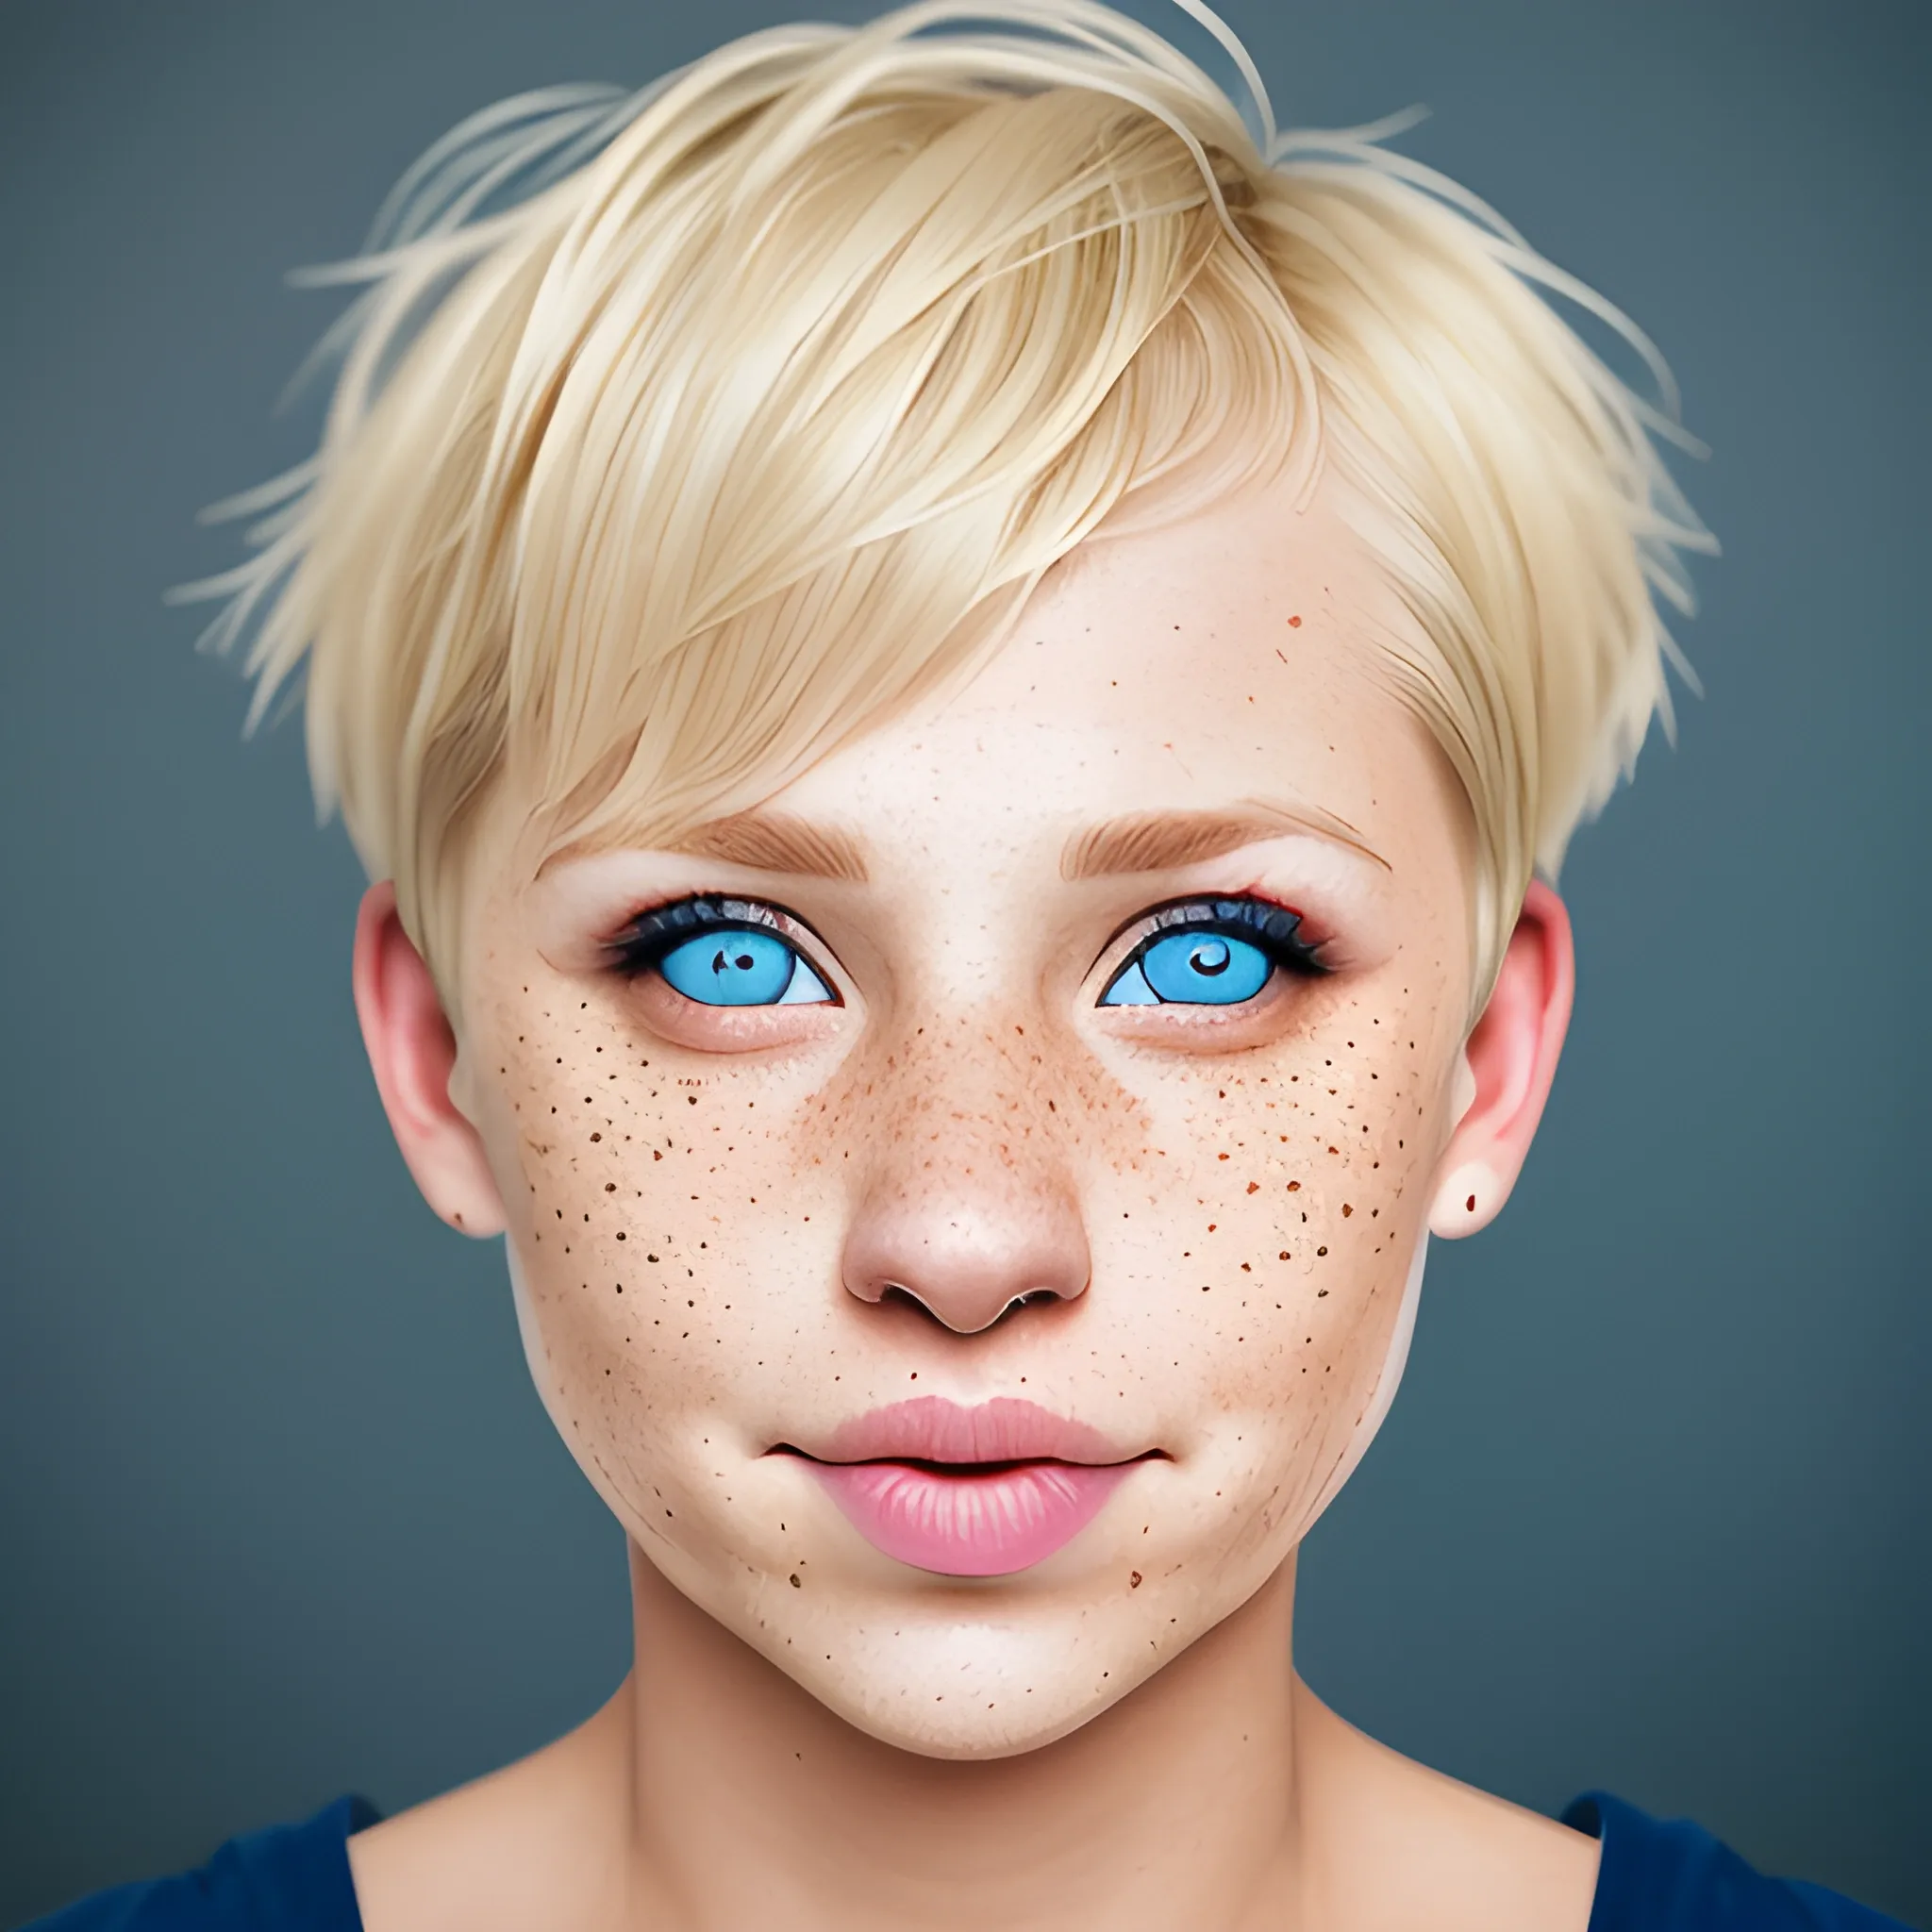 A woman with short blonde hair, septum ring, blue eyes portrait, round nose, freckles happy